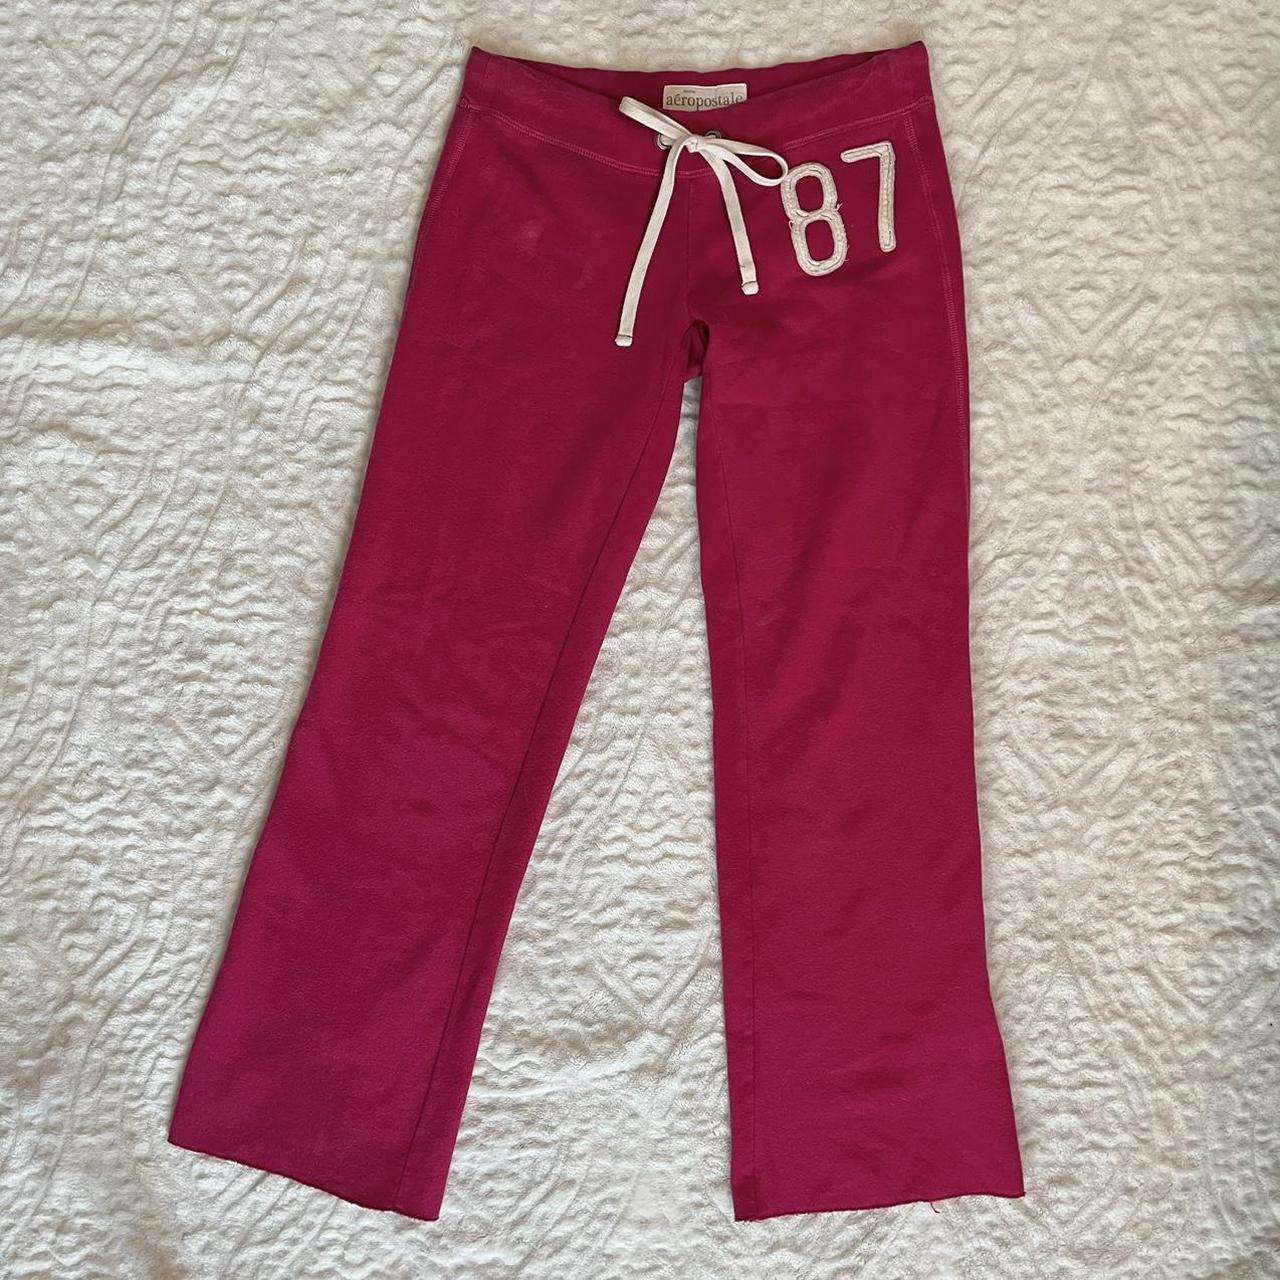 Aeropostale Women's Pink Joggers-tracksuits